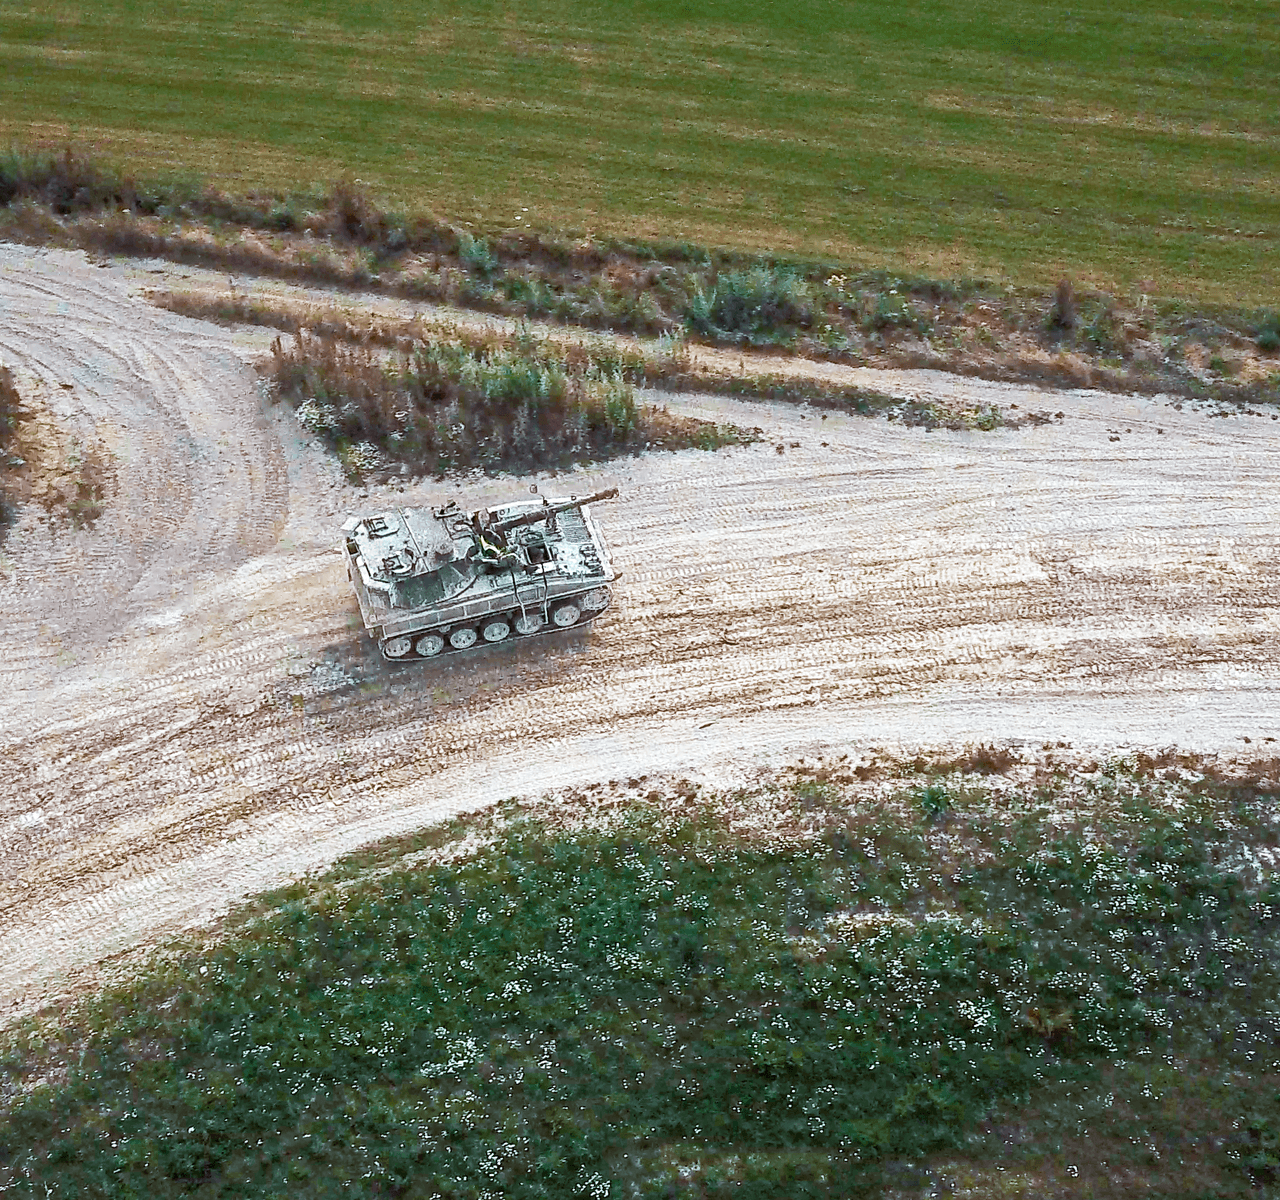 "Mavic 2 Pro" aerial drone photo of a tank driving on a sand track at "Juniper Leisure, Tank Driving" in Winchester